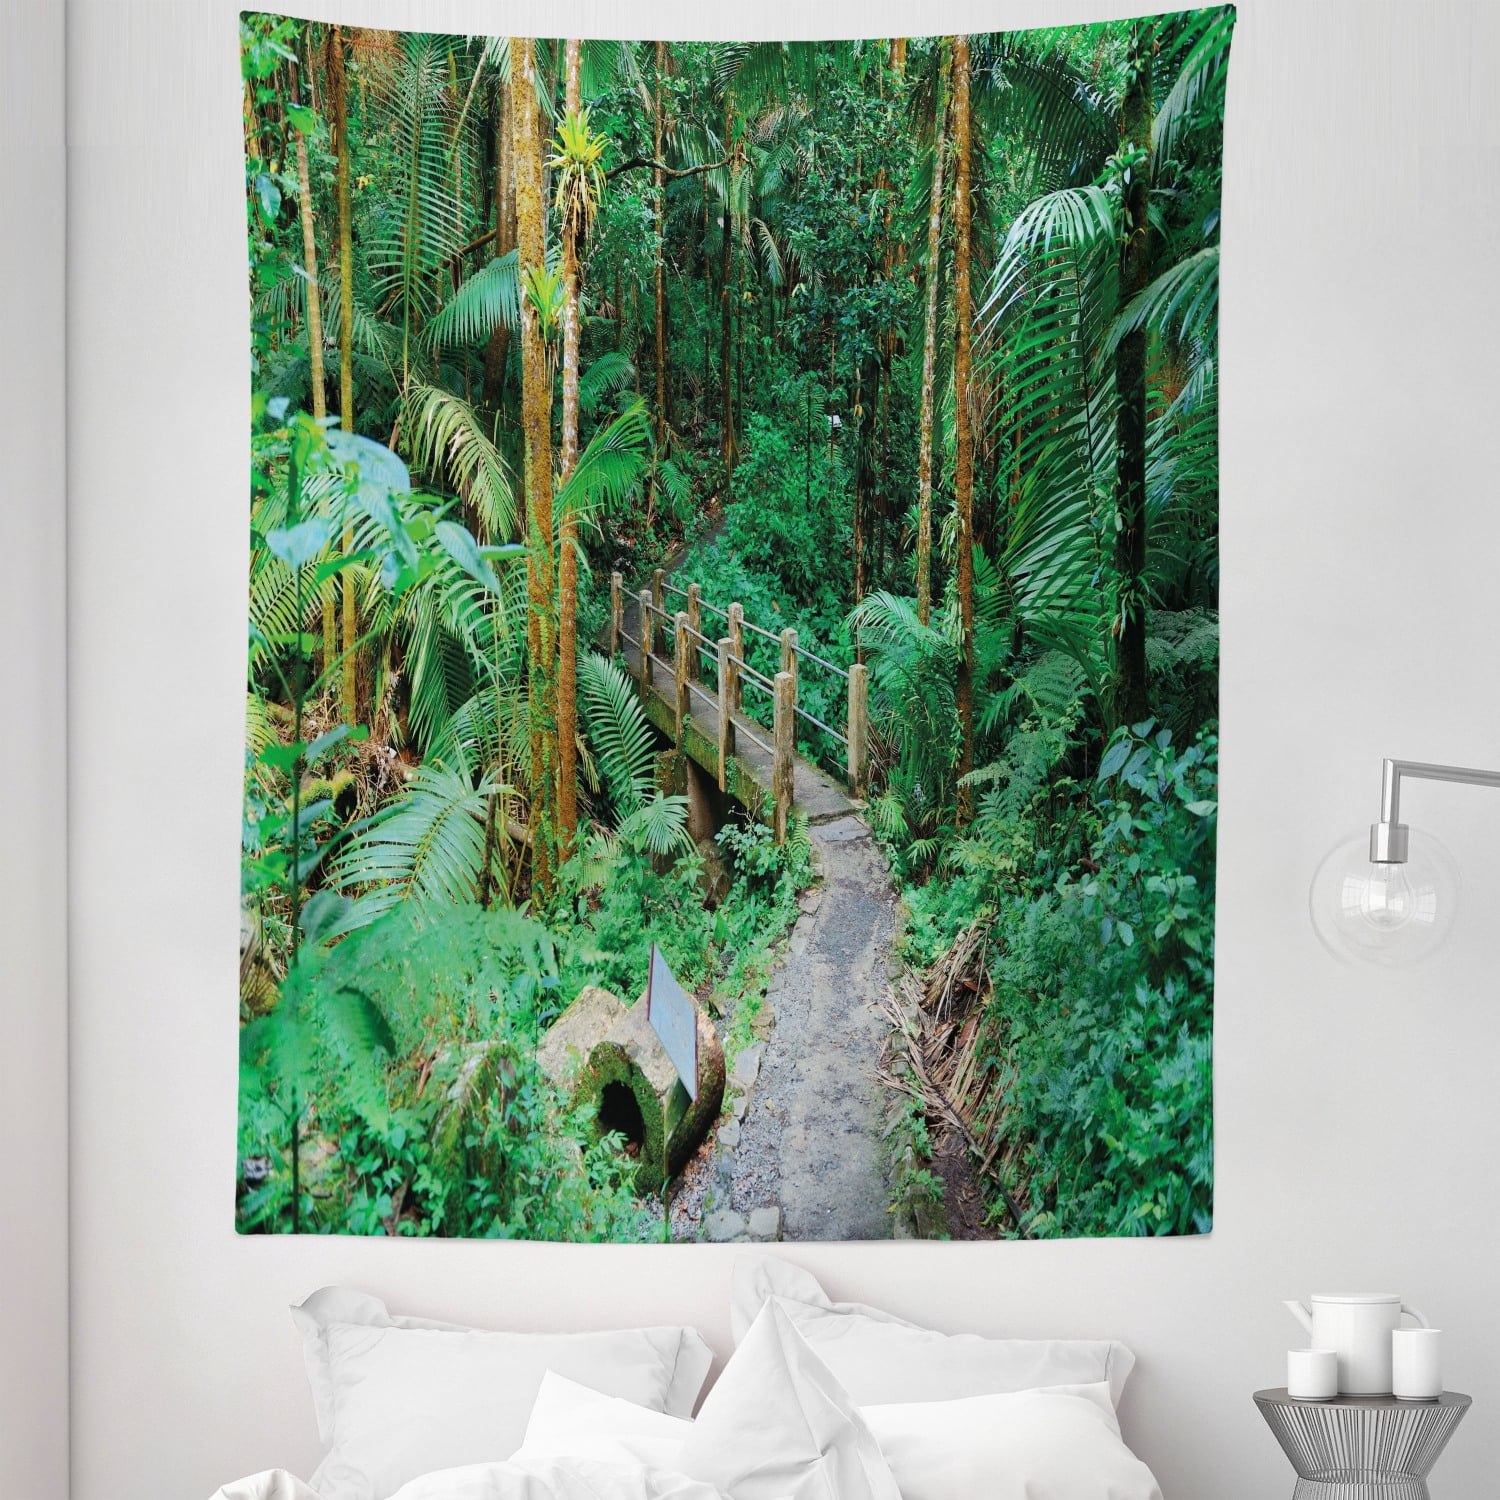 Natural Jungle Theme Poster Indian Wall Hanging 100% Cotton Home Decor Throw Art 